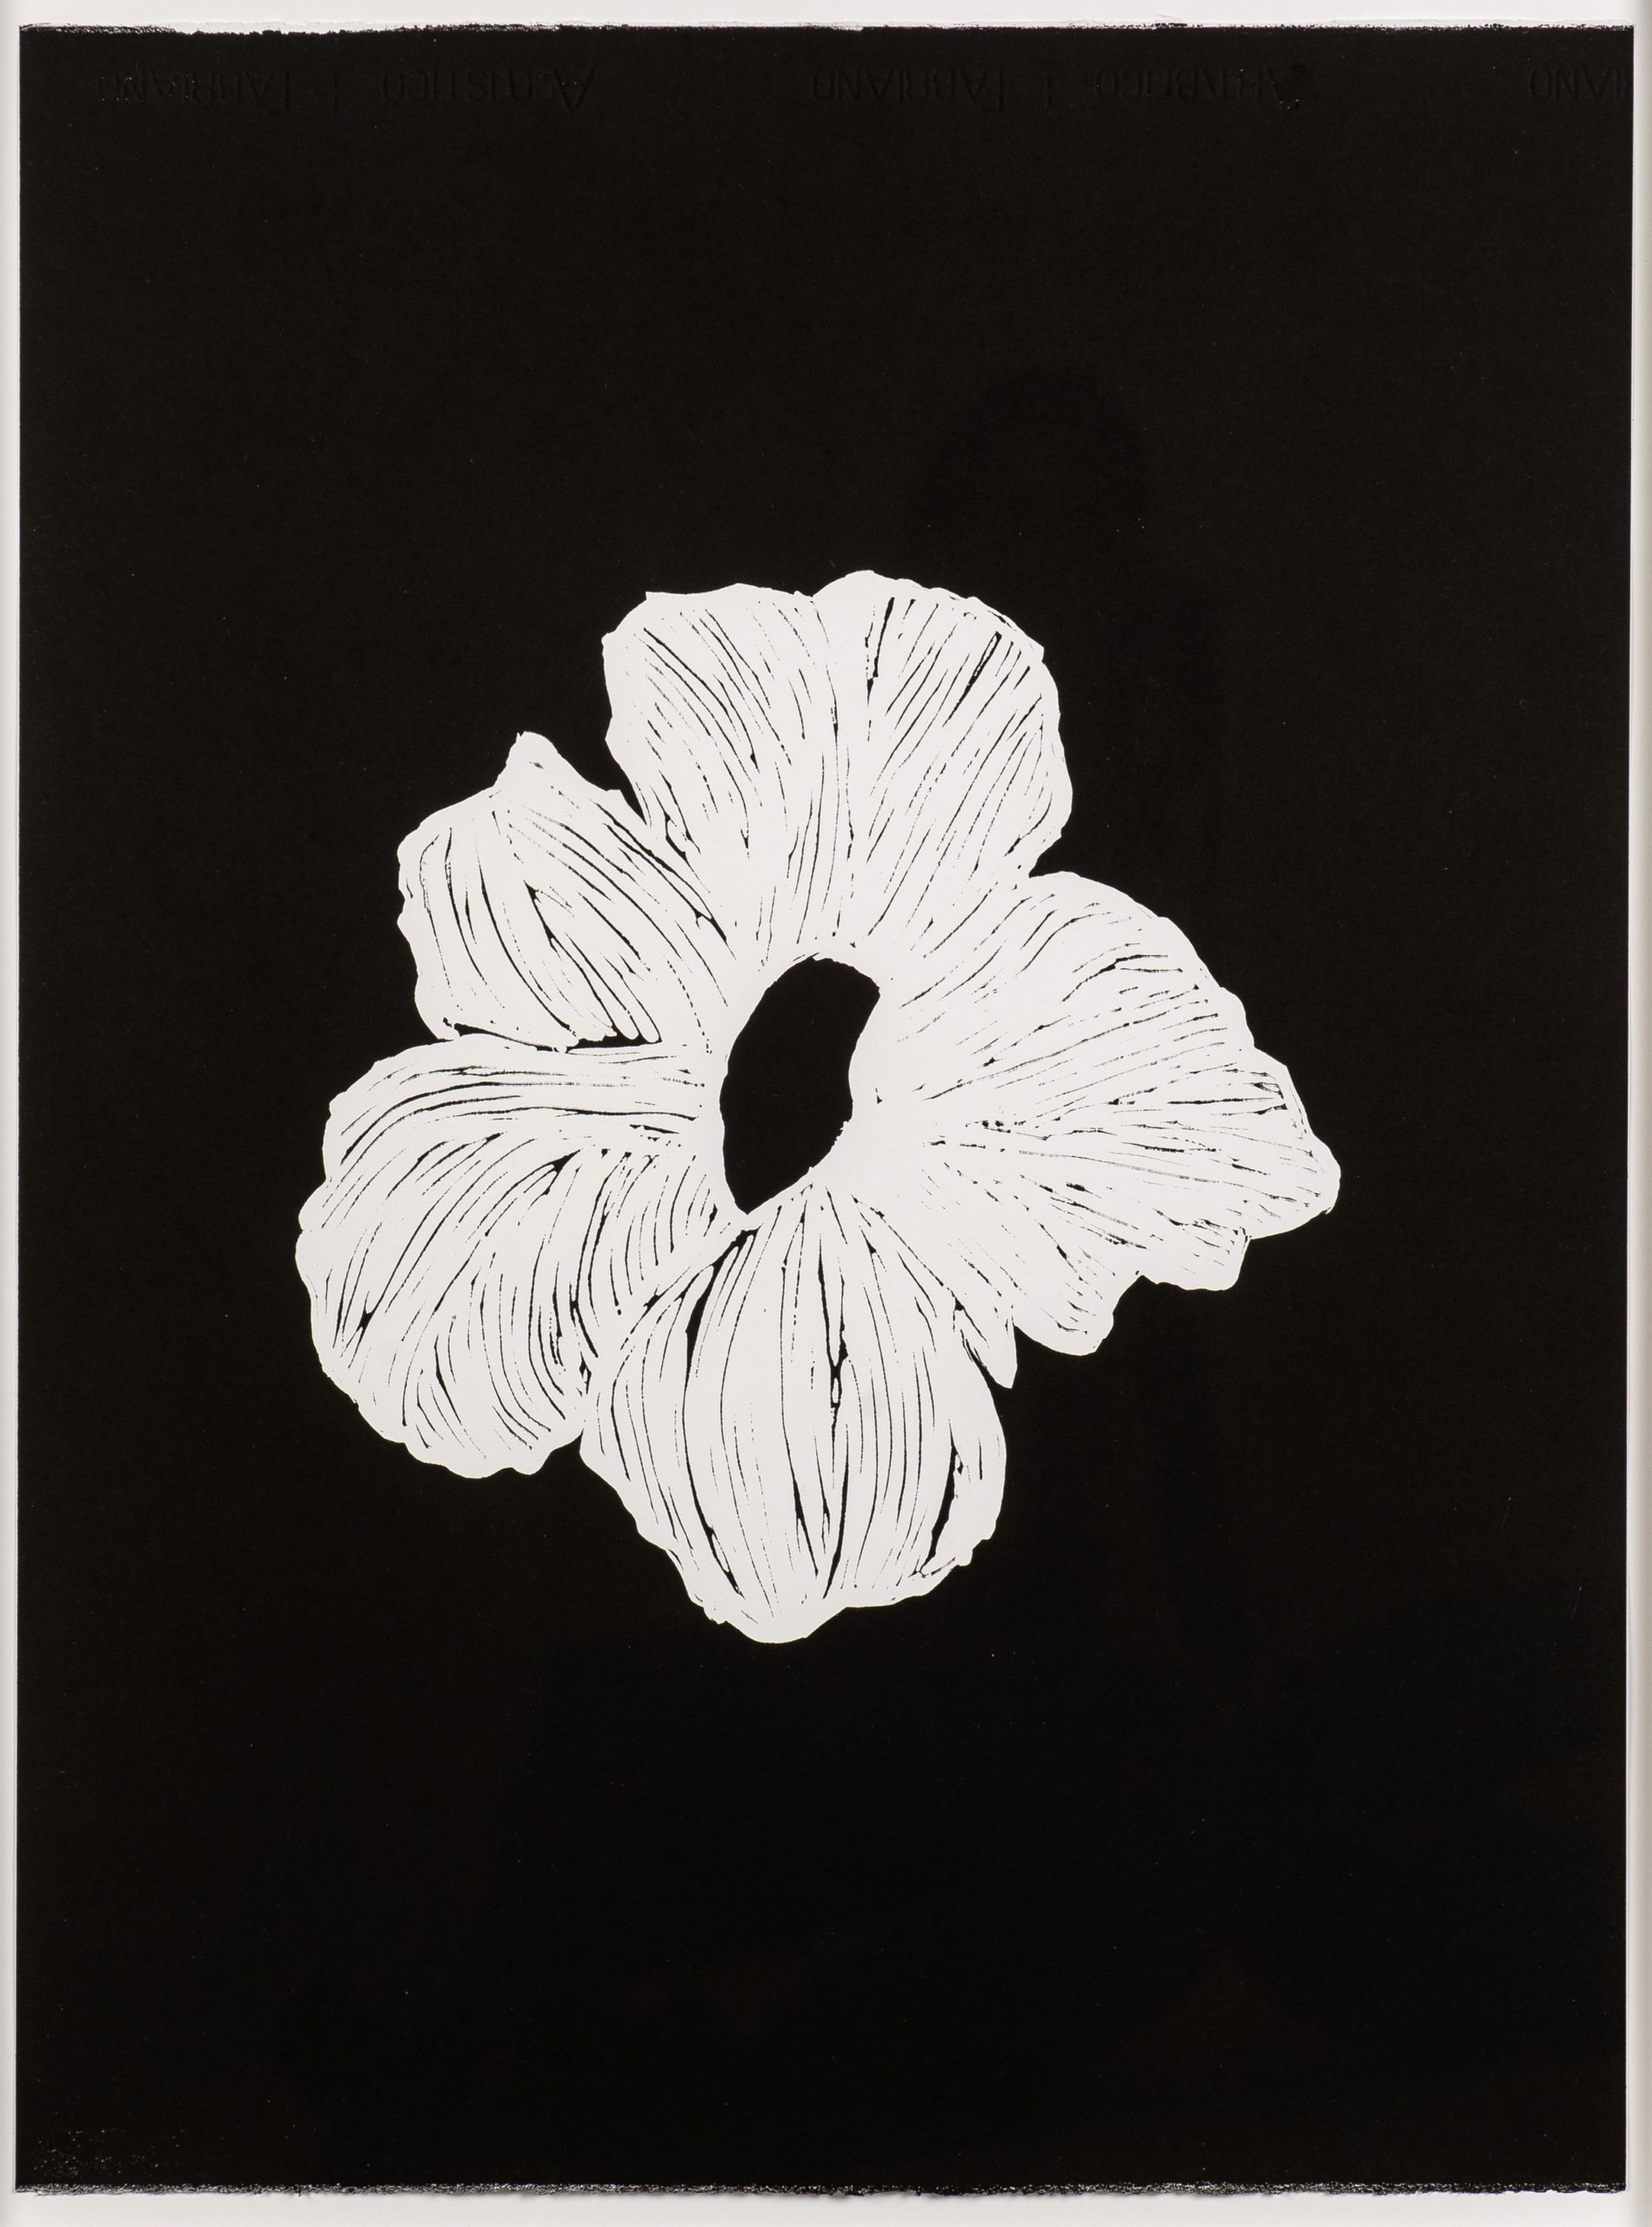 Claire Lieberman: "Space Hibiscus", 2022. Linocut, 30" x 22". Edition of 20.